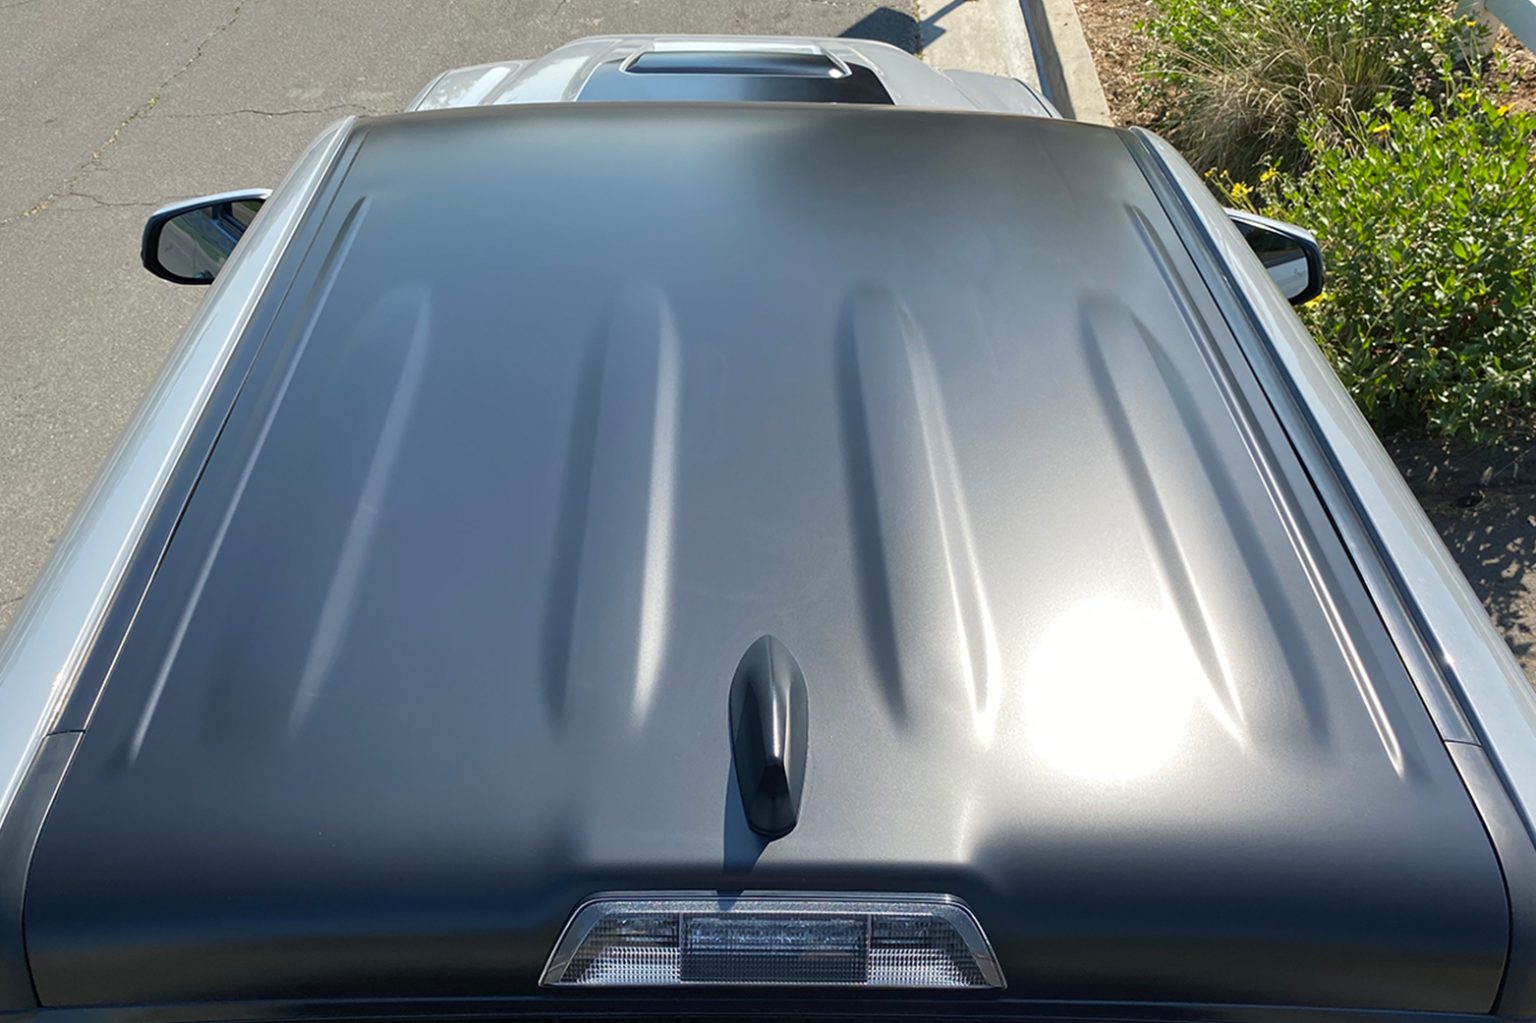 Vinyl Wrapping Your Roof for the 3rd Gen Toyota